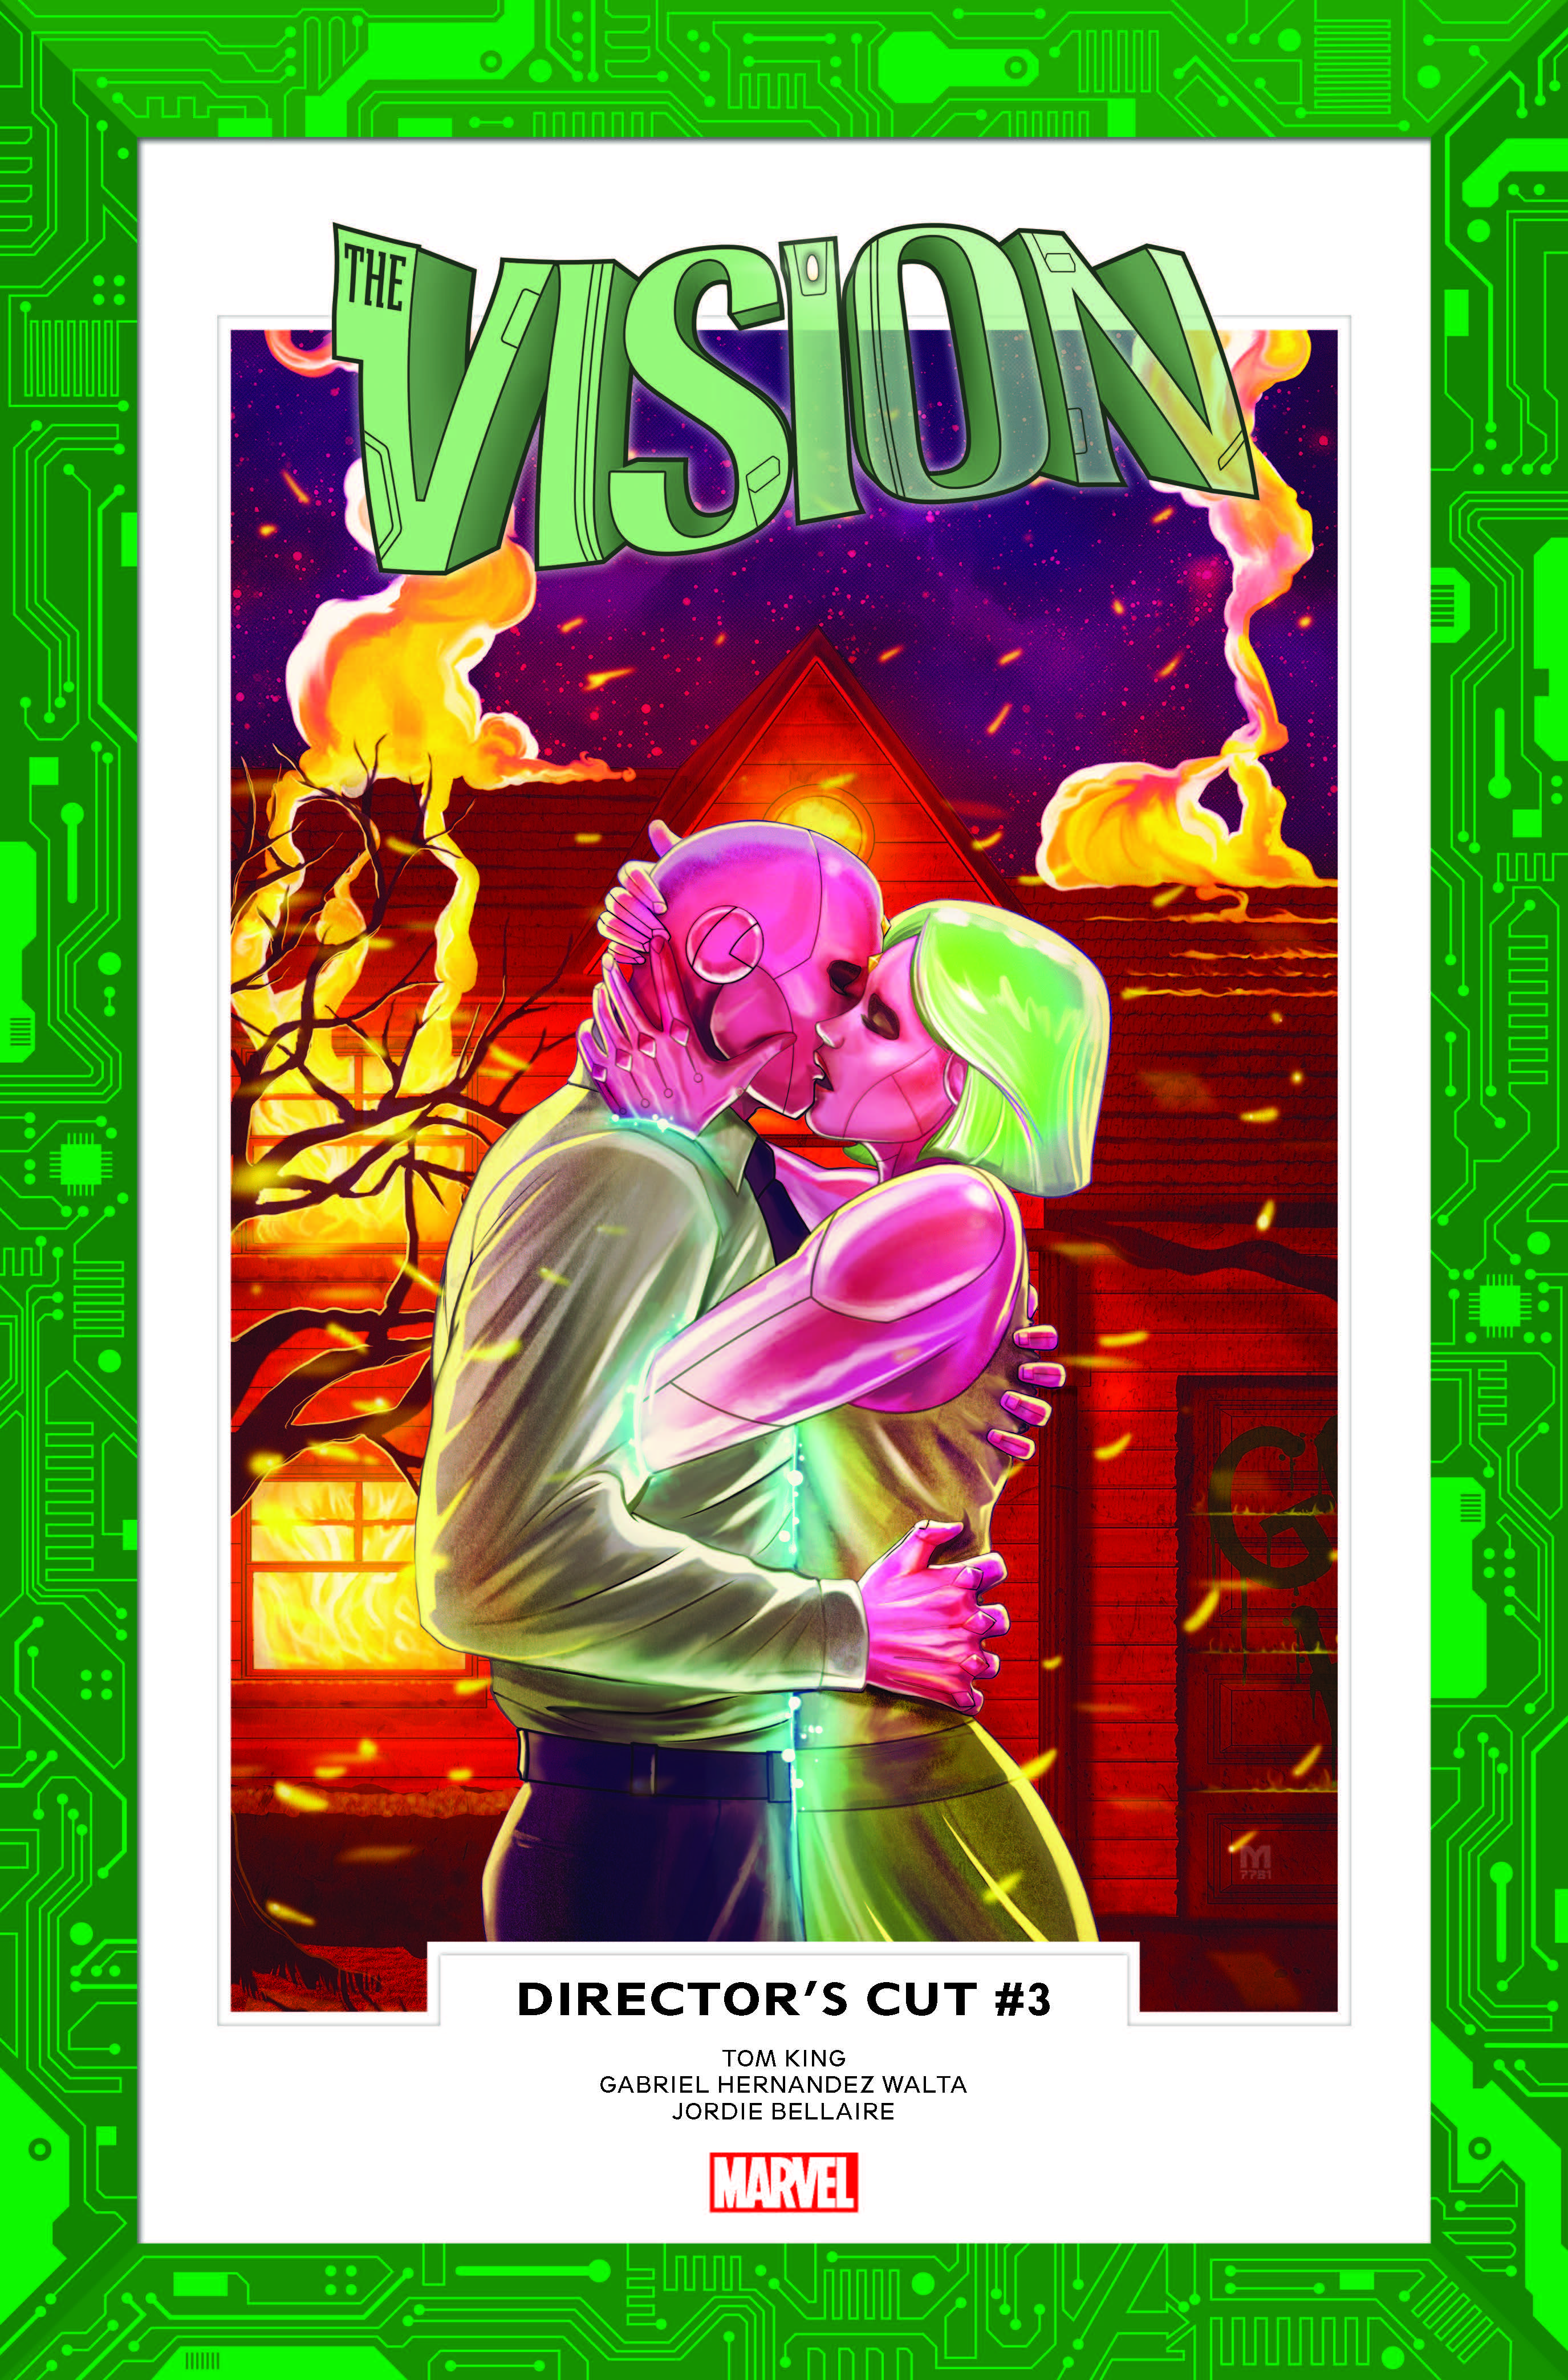 Vision Director's Cut (2017) #3